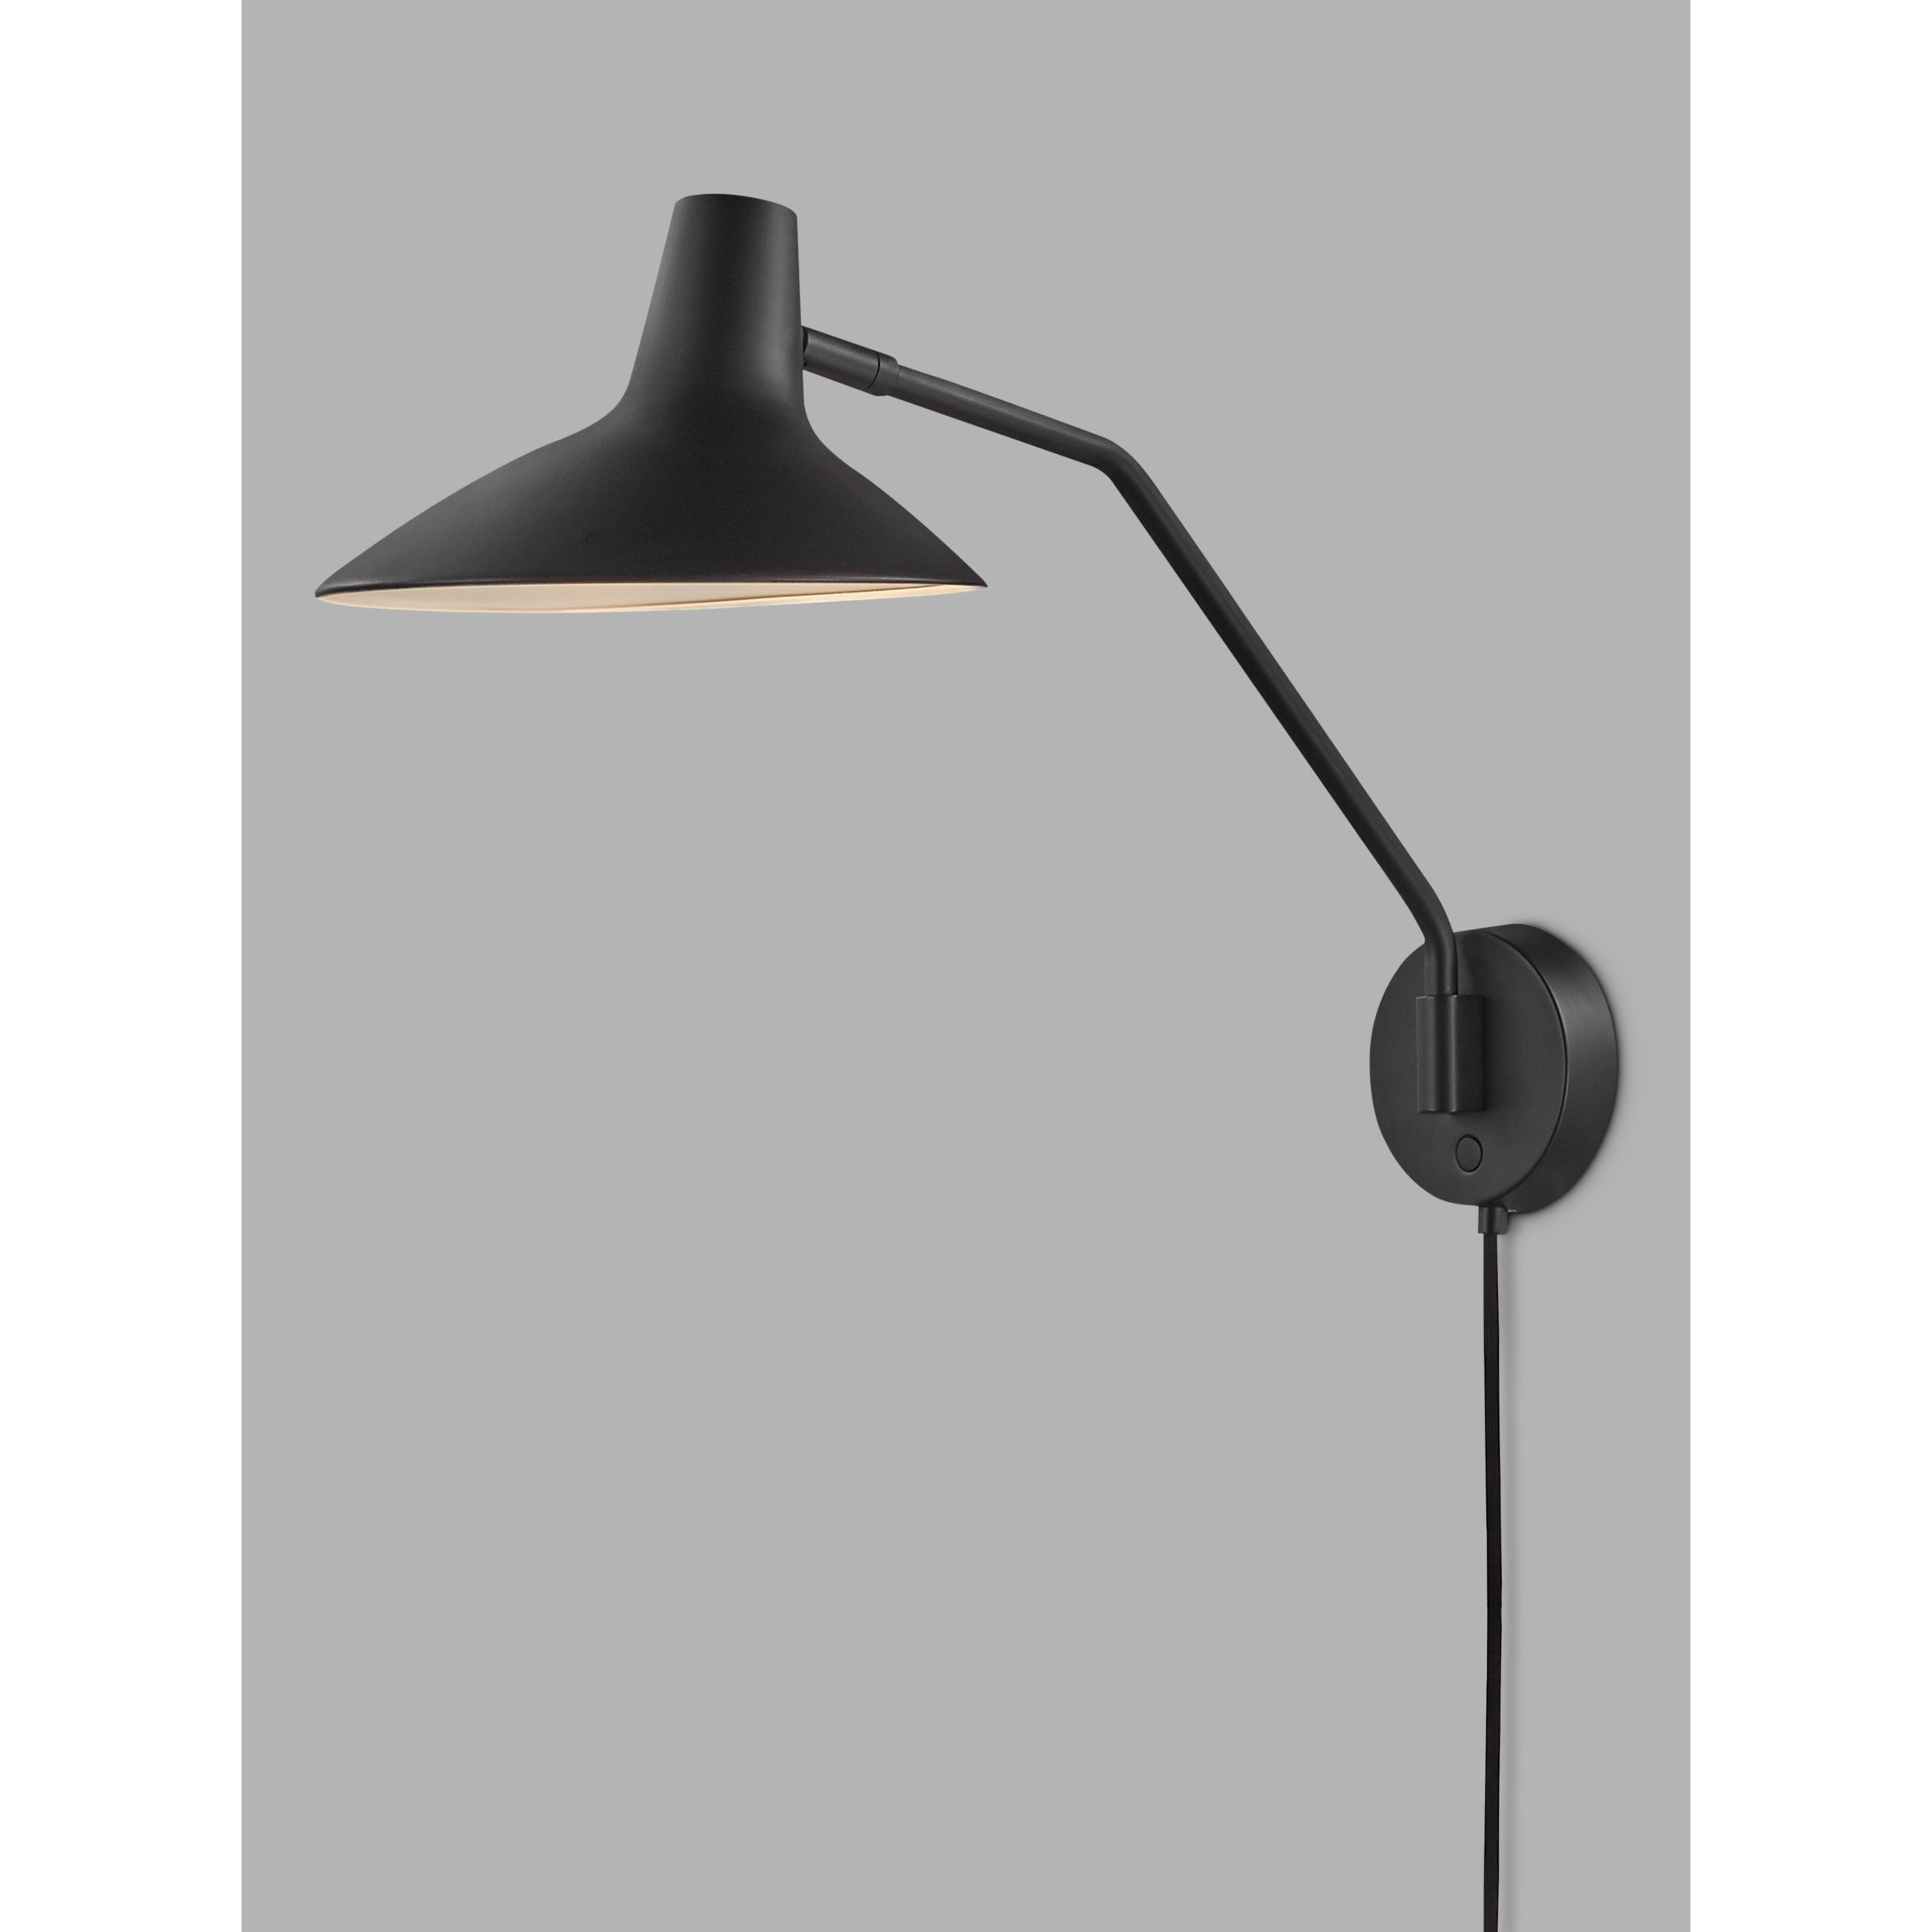 Nordlux Darci Touch Wall Light, Black - image 1